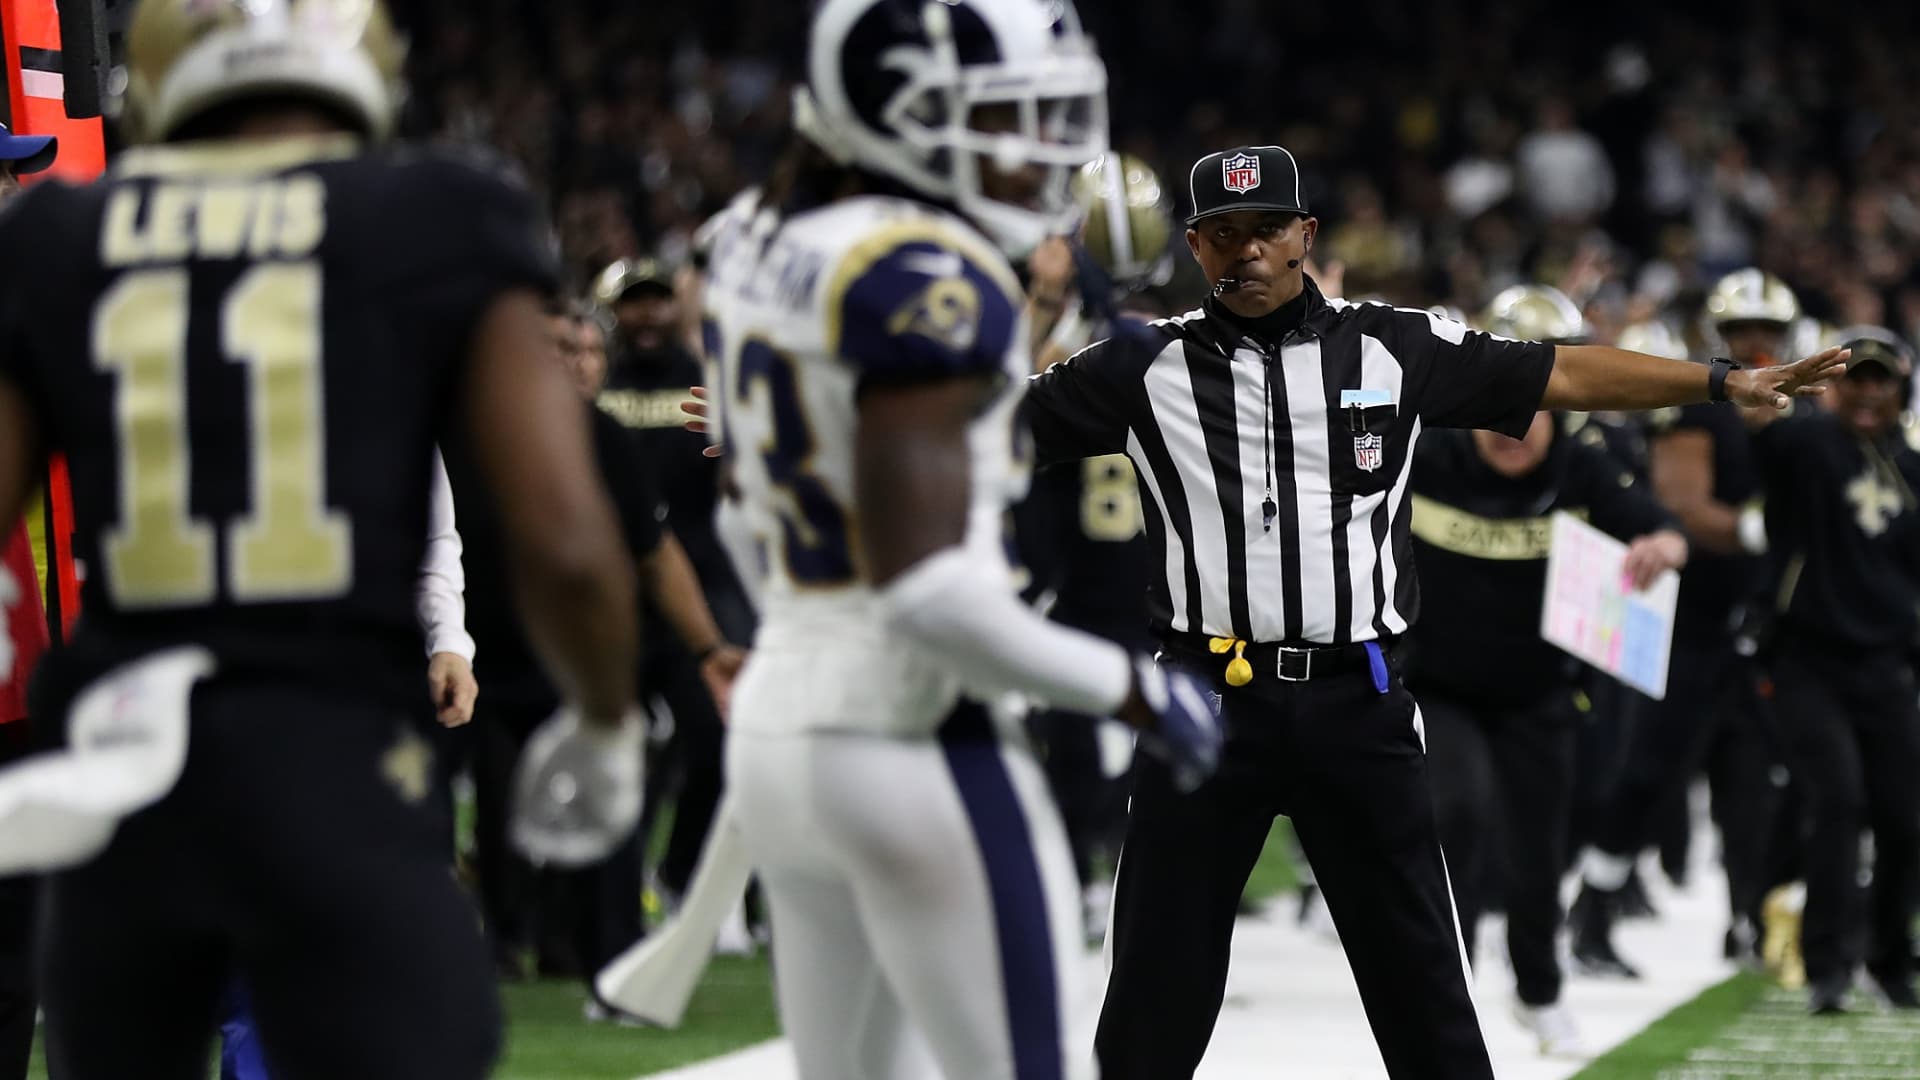 A referee watches as Tommylee Lewis #11 of the New Orleans Saints drops a pass broken up by Nickell Robey-Coleman #23 of the Los Angeles Rams during the fourth quarter in the NFC Championship game at the Mercedes-Benz Superdome on January 20, 2019 in New Orleans, Louisiana. at Mercedes-Benz Superdome on January 20, 2019 in New Orleans, Louisiana.